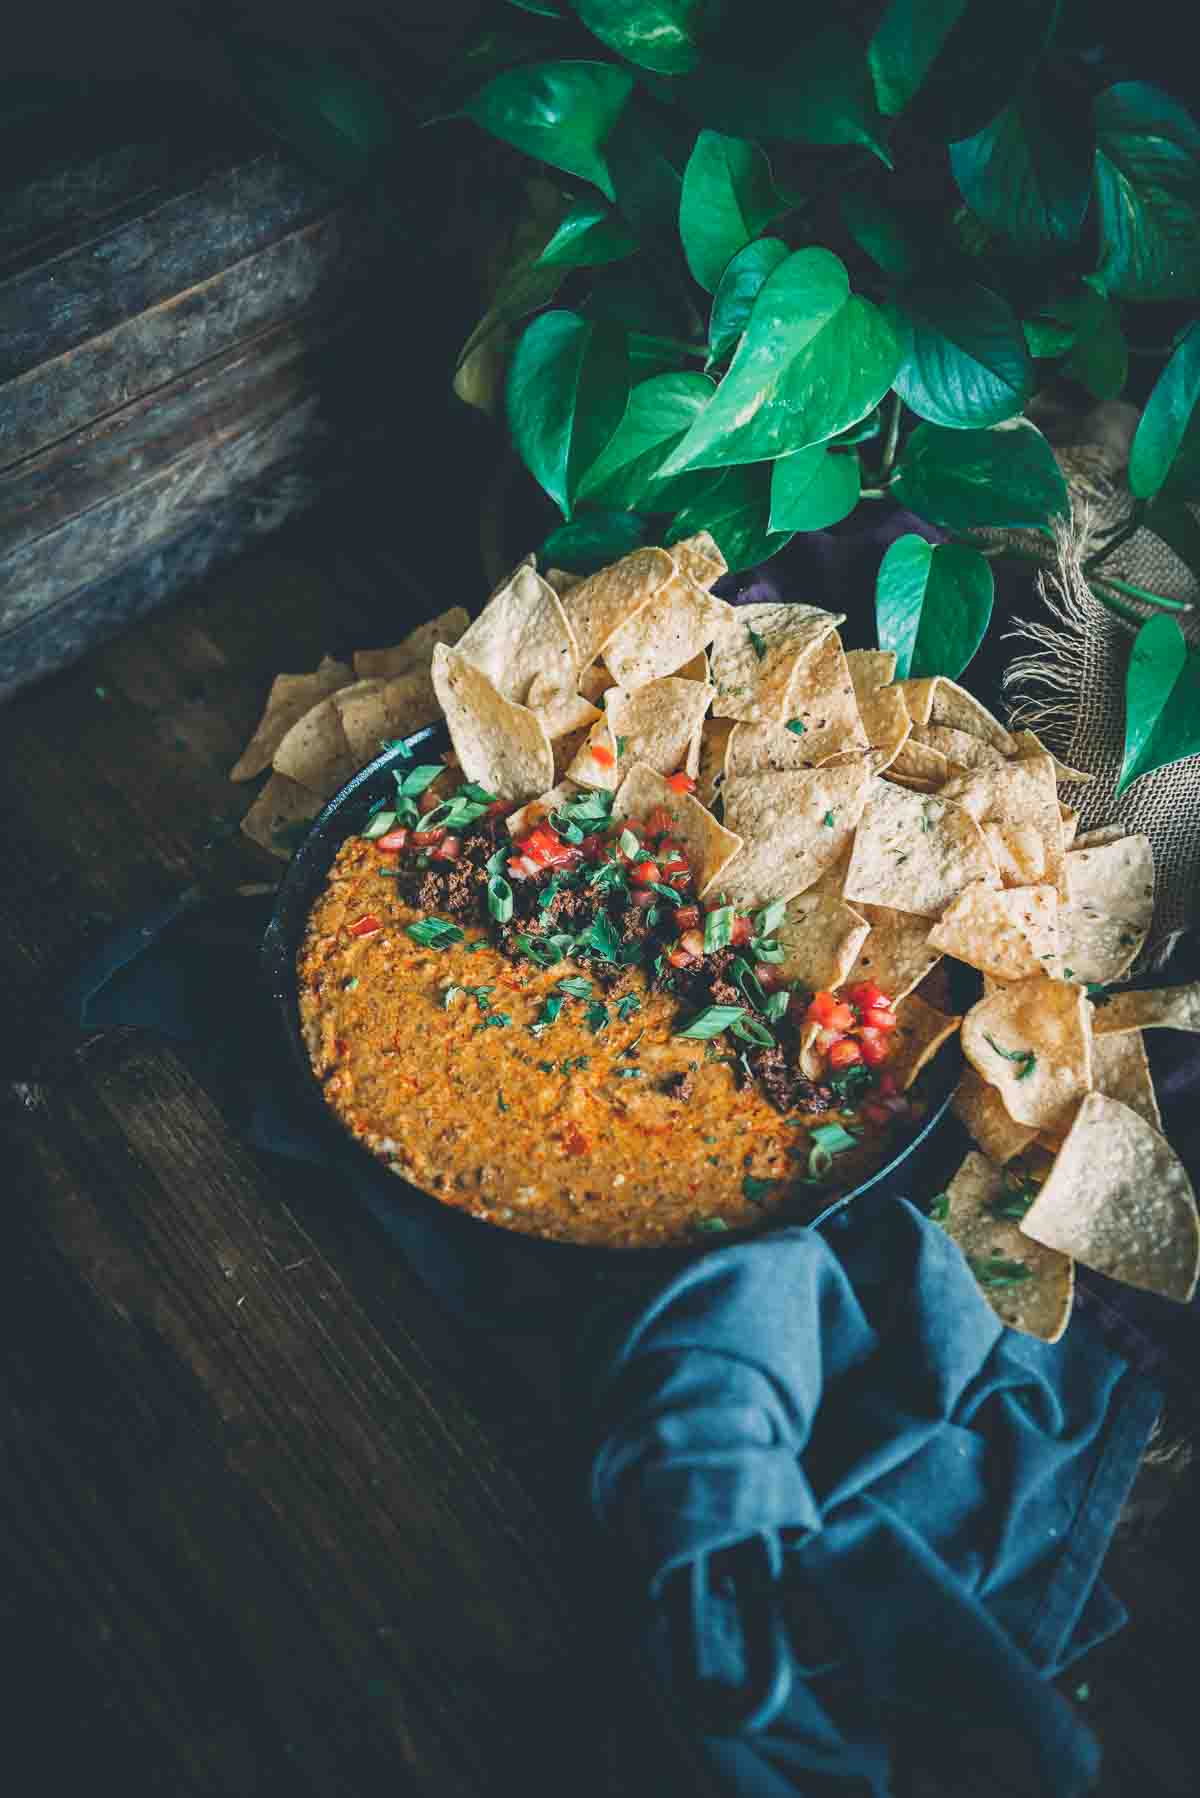 Cast iron skillet filled with melted smoked cheese dip topped with colorful garnish of pico de gallo,  minced scallions, and tortilla chips.